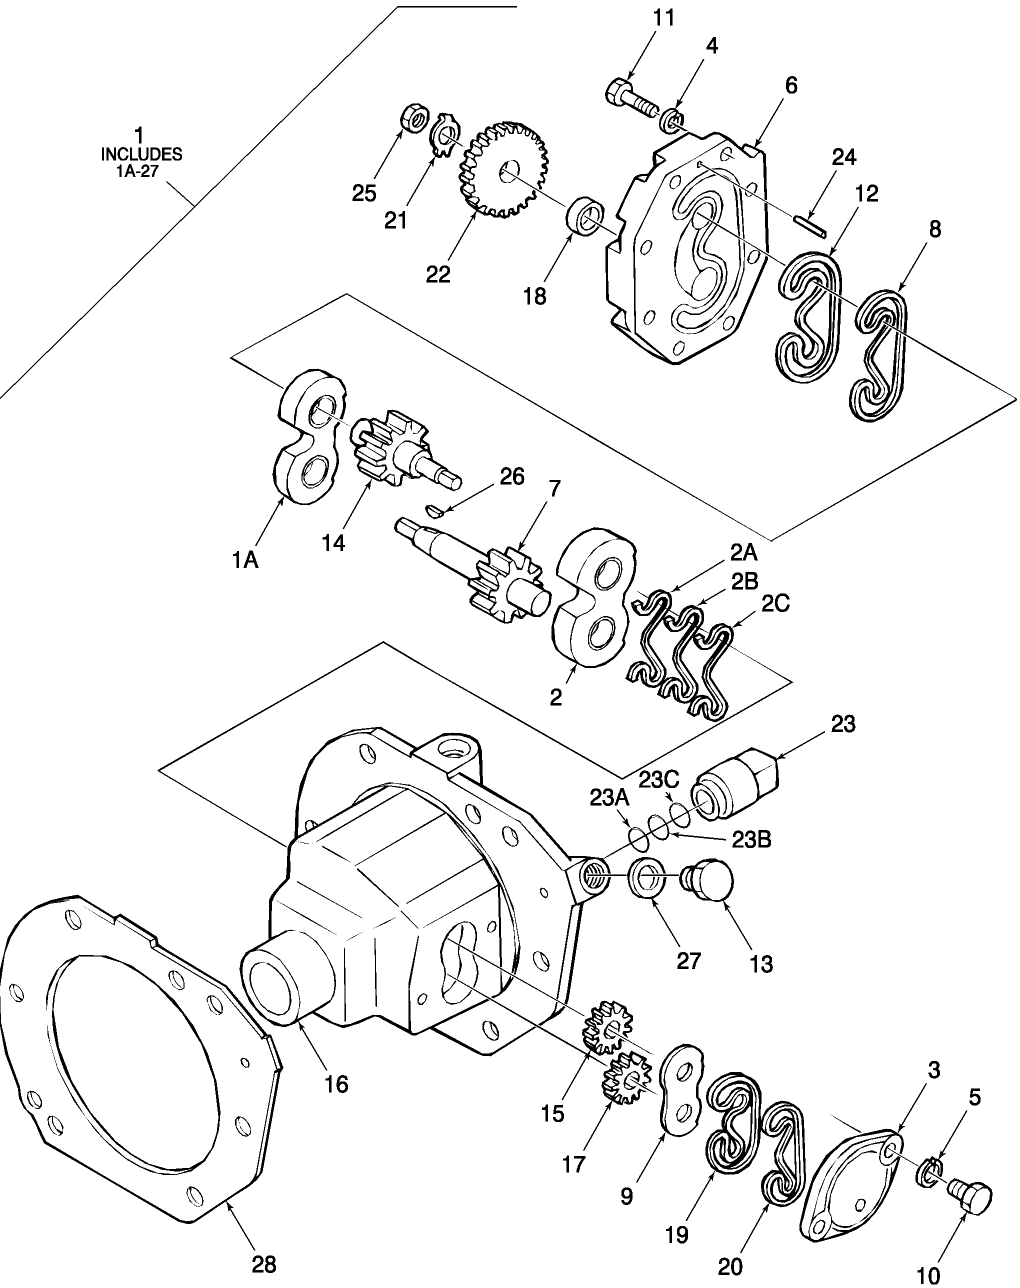 05M01 PUMP ASSEMBLY, CENTER HOUSING MOUNTED